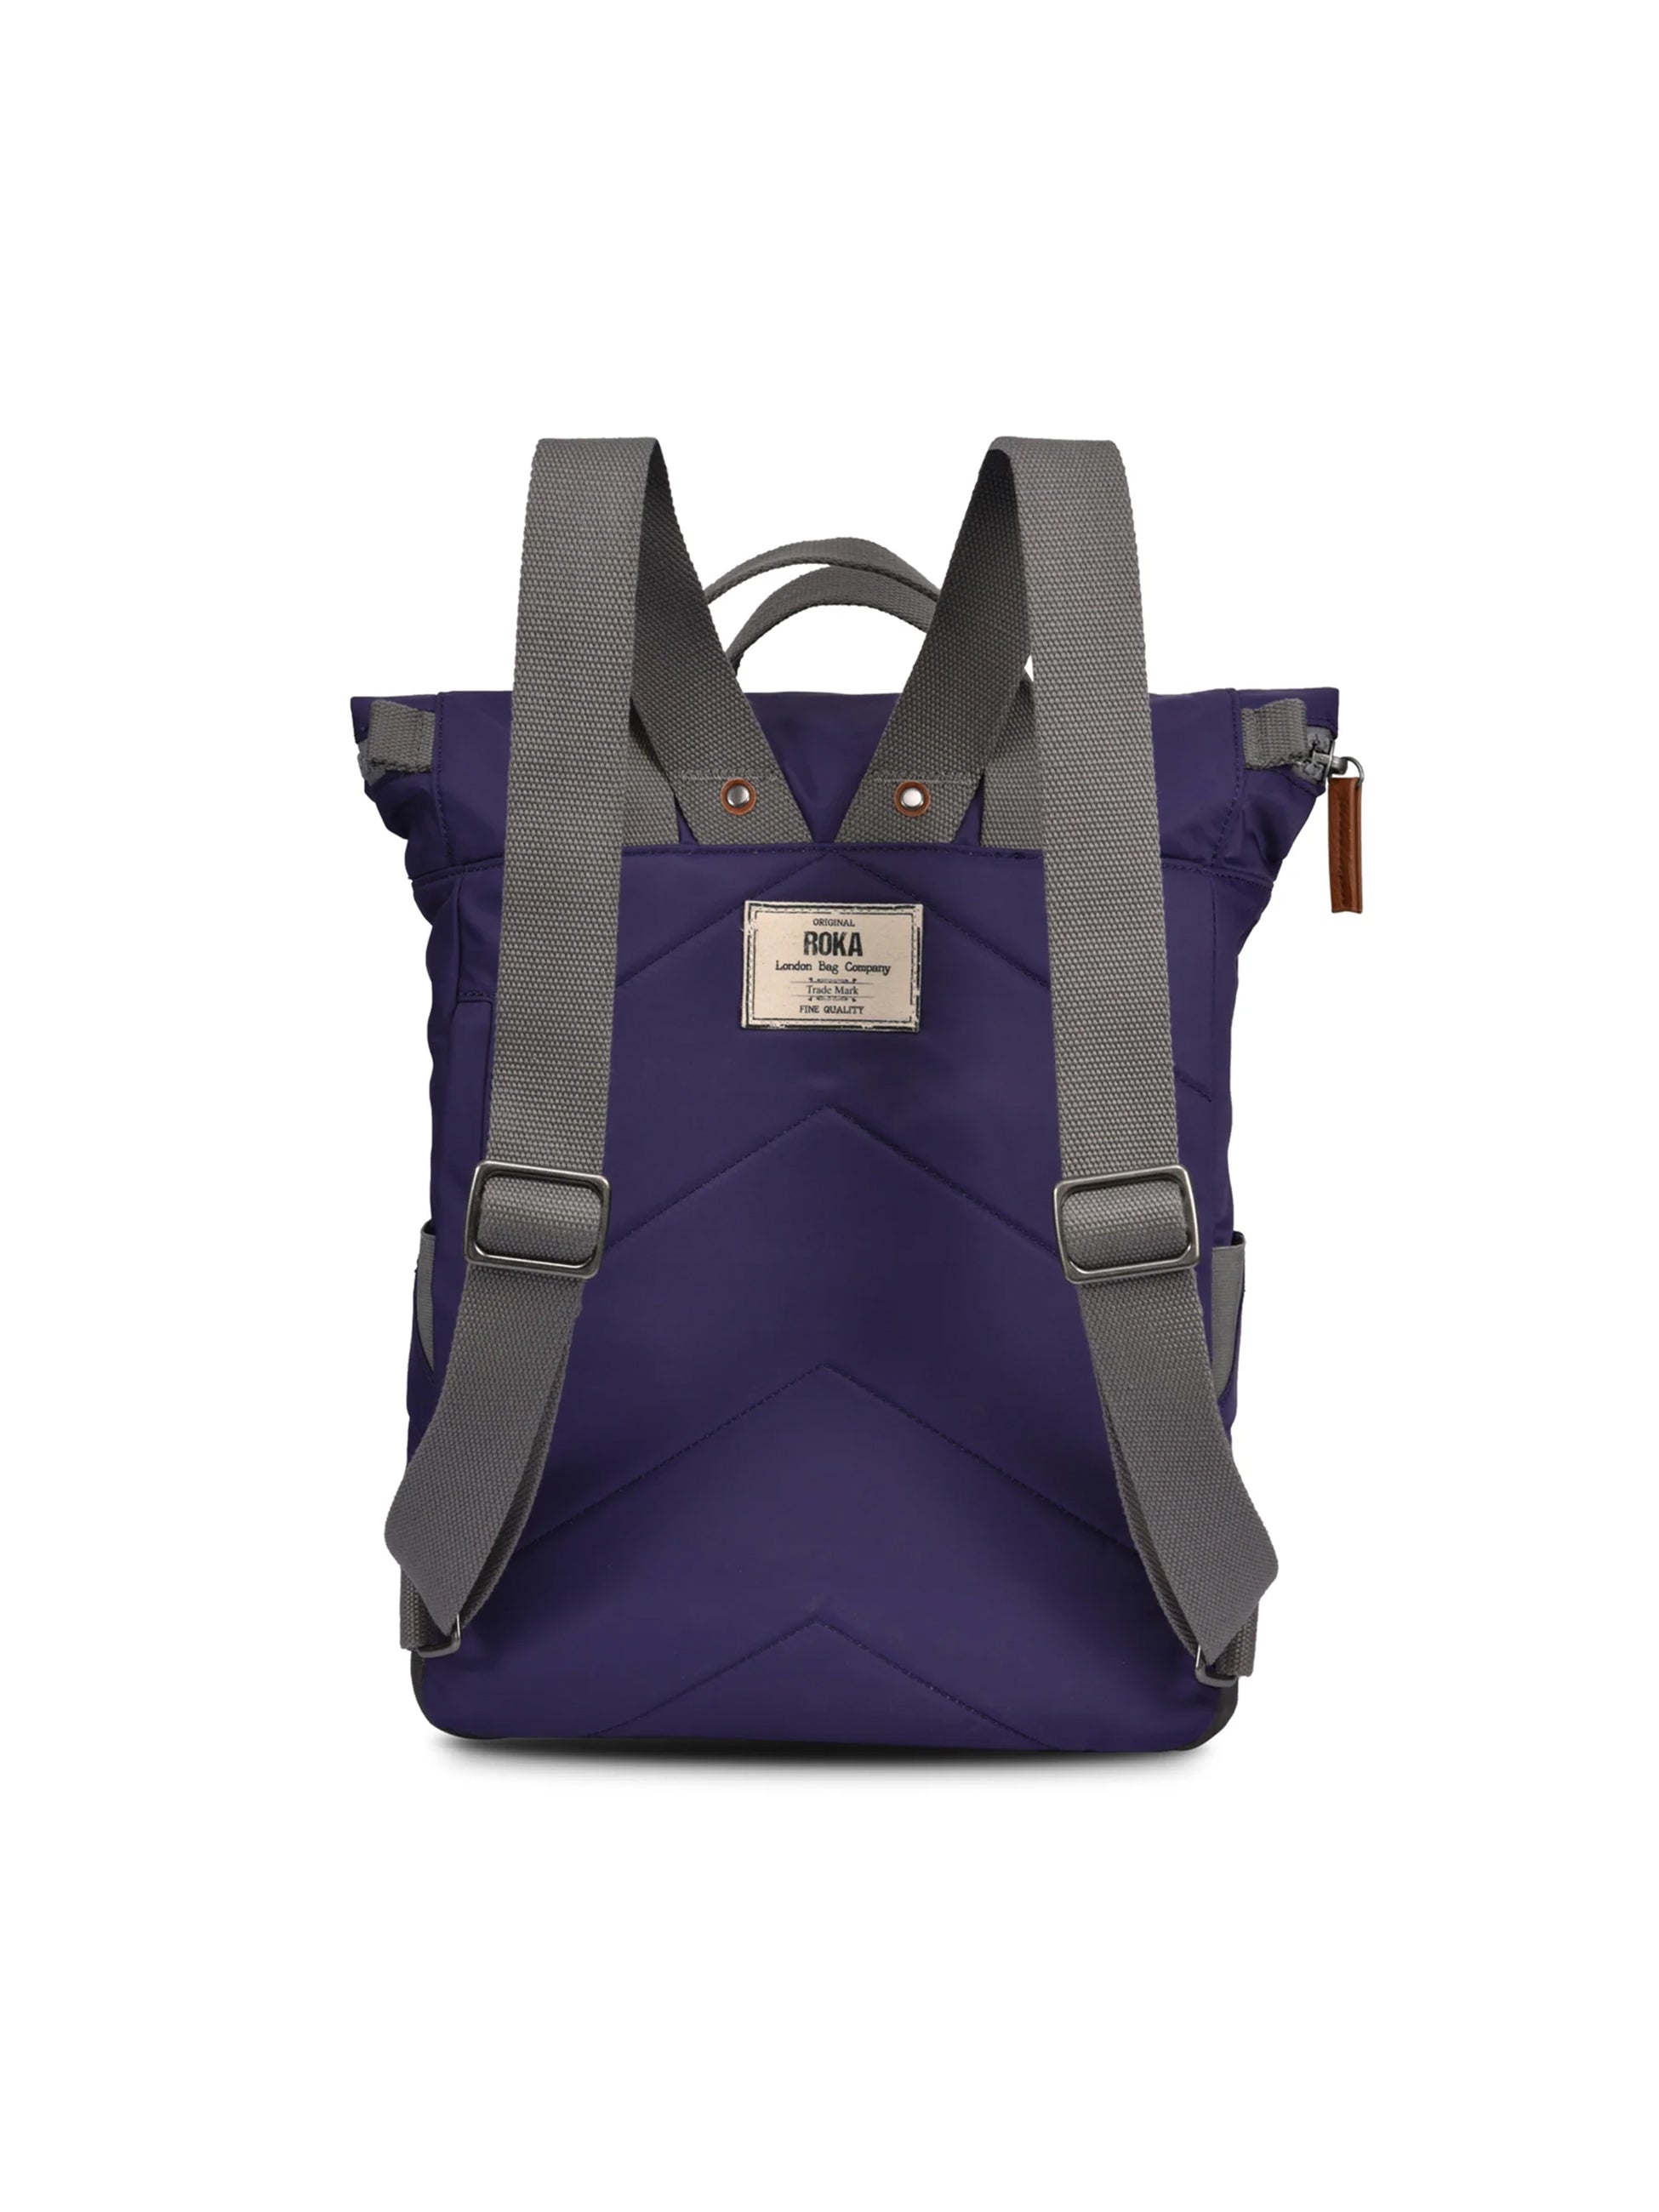 Canfield B Medium Sustainable - Mulberry